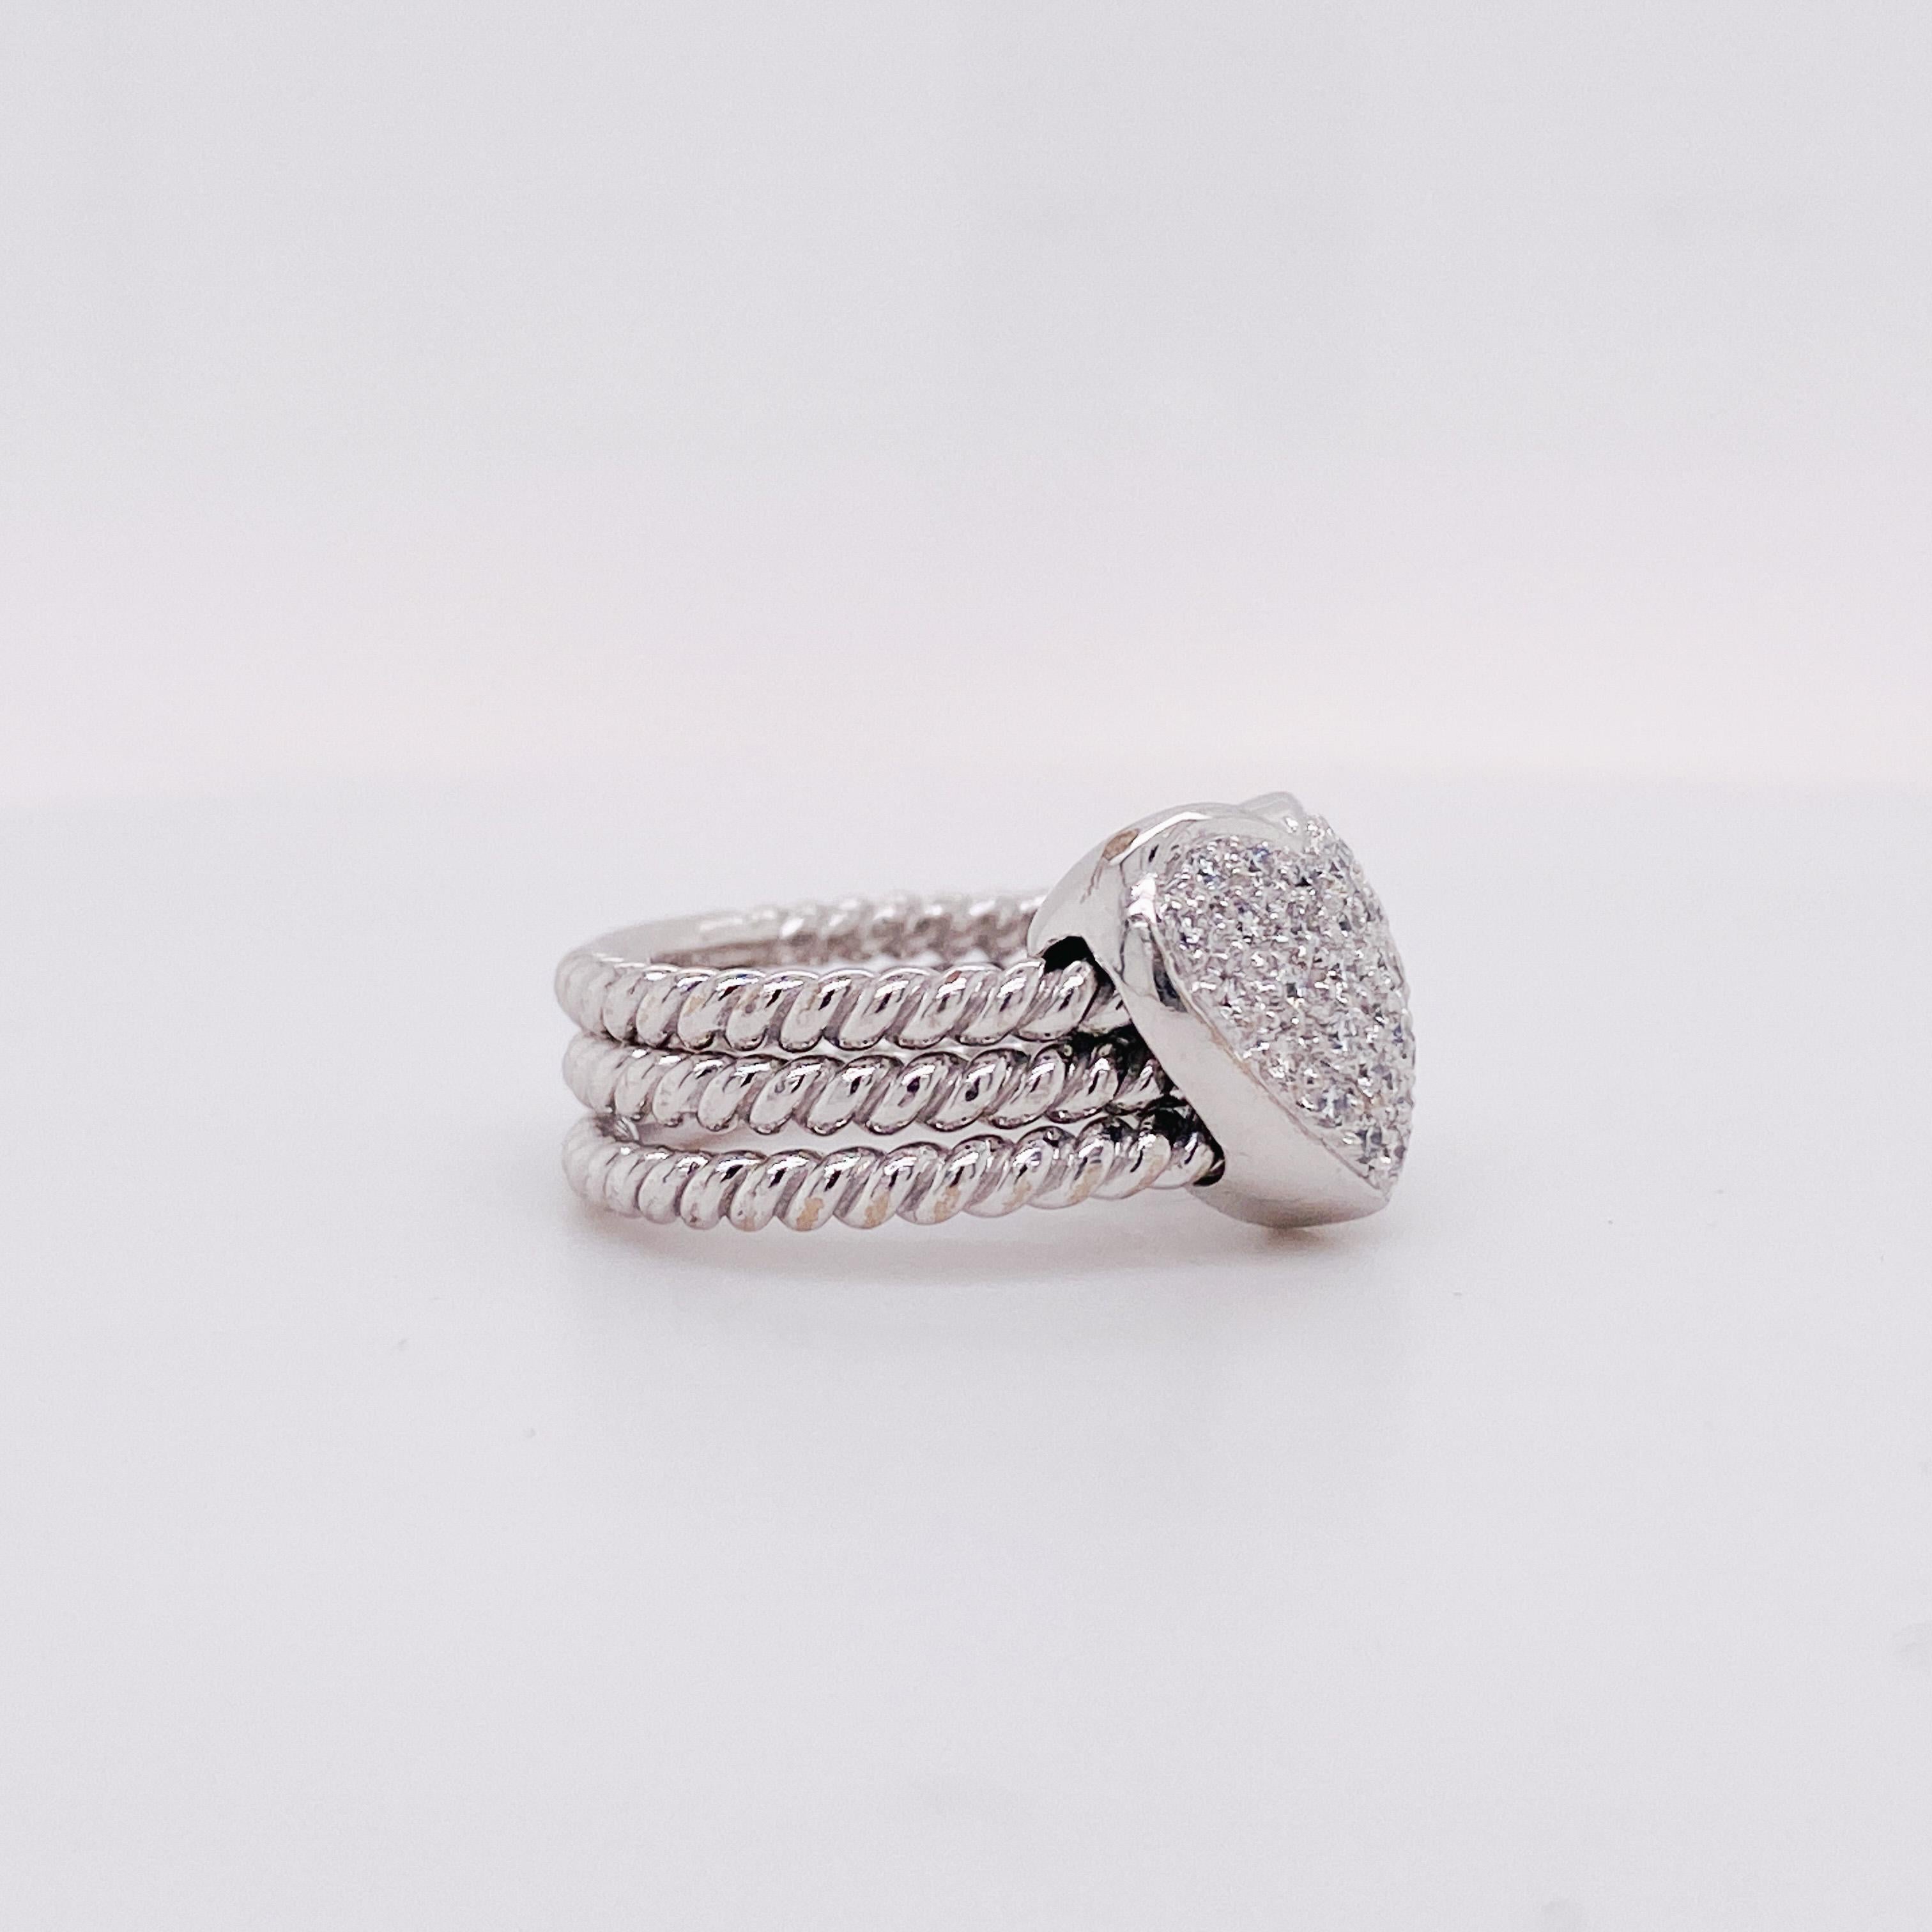 This beautiful pave diamond heart ring isn't just a classy fashion statement, it's also great for fidgeters! The pave heart moves around its 18K white gold twisted bands. There is a cursive 'M' inscribed underneath the pave heart. The pave diamonds